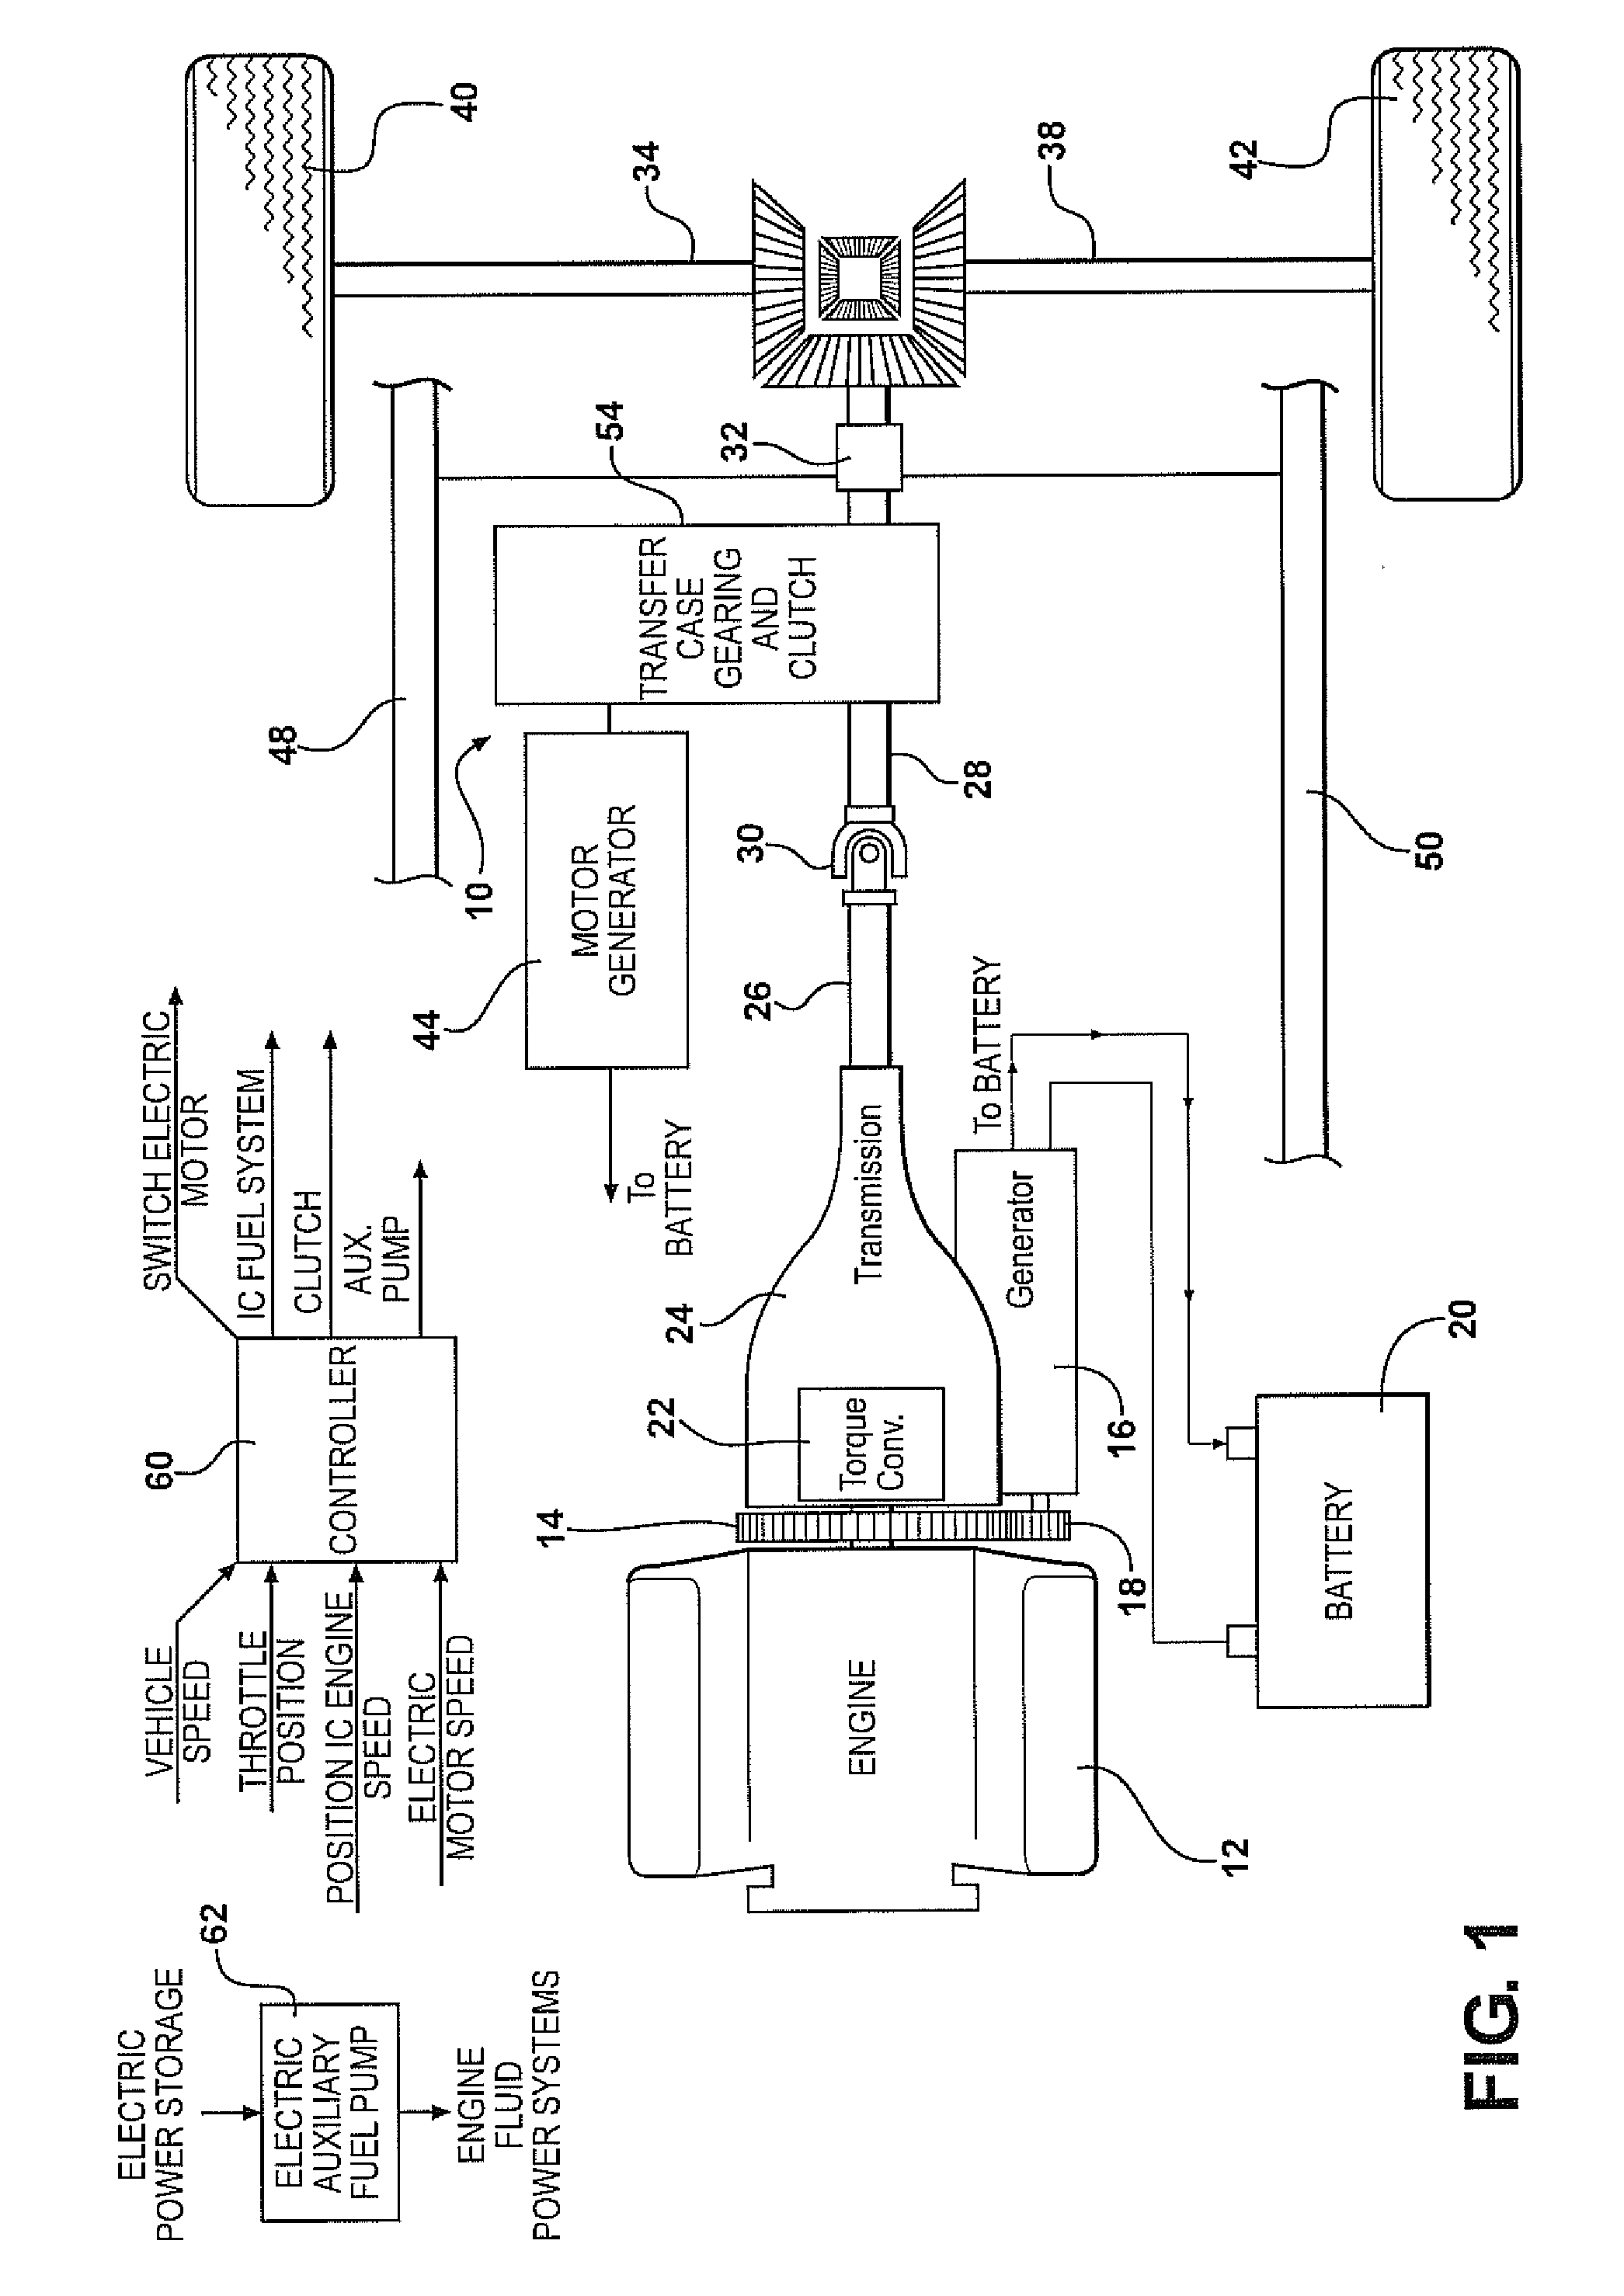 Hybrid vehicle formed by converting a conventional IC engine powered vehicle and method of such conversion